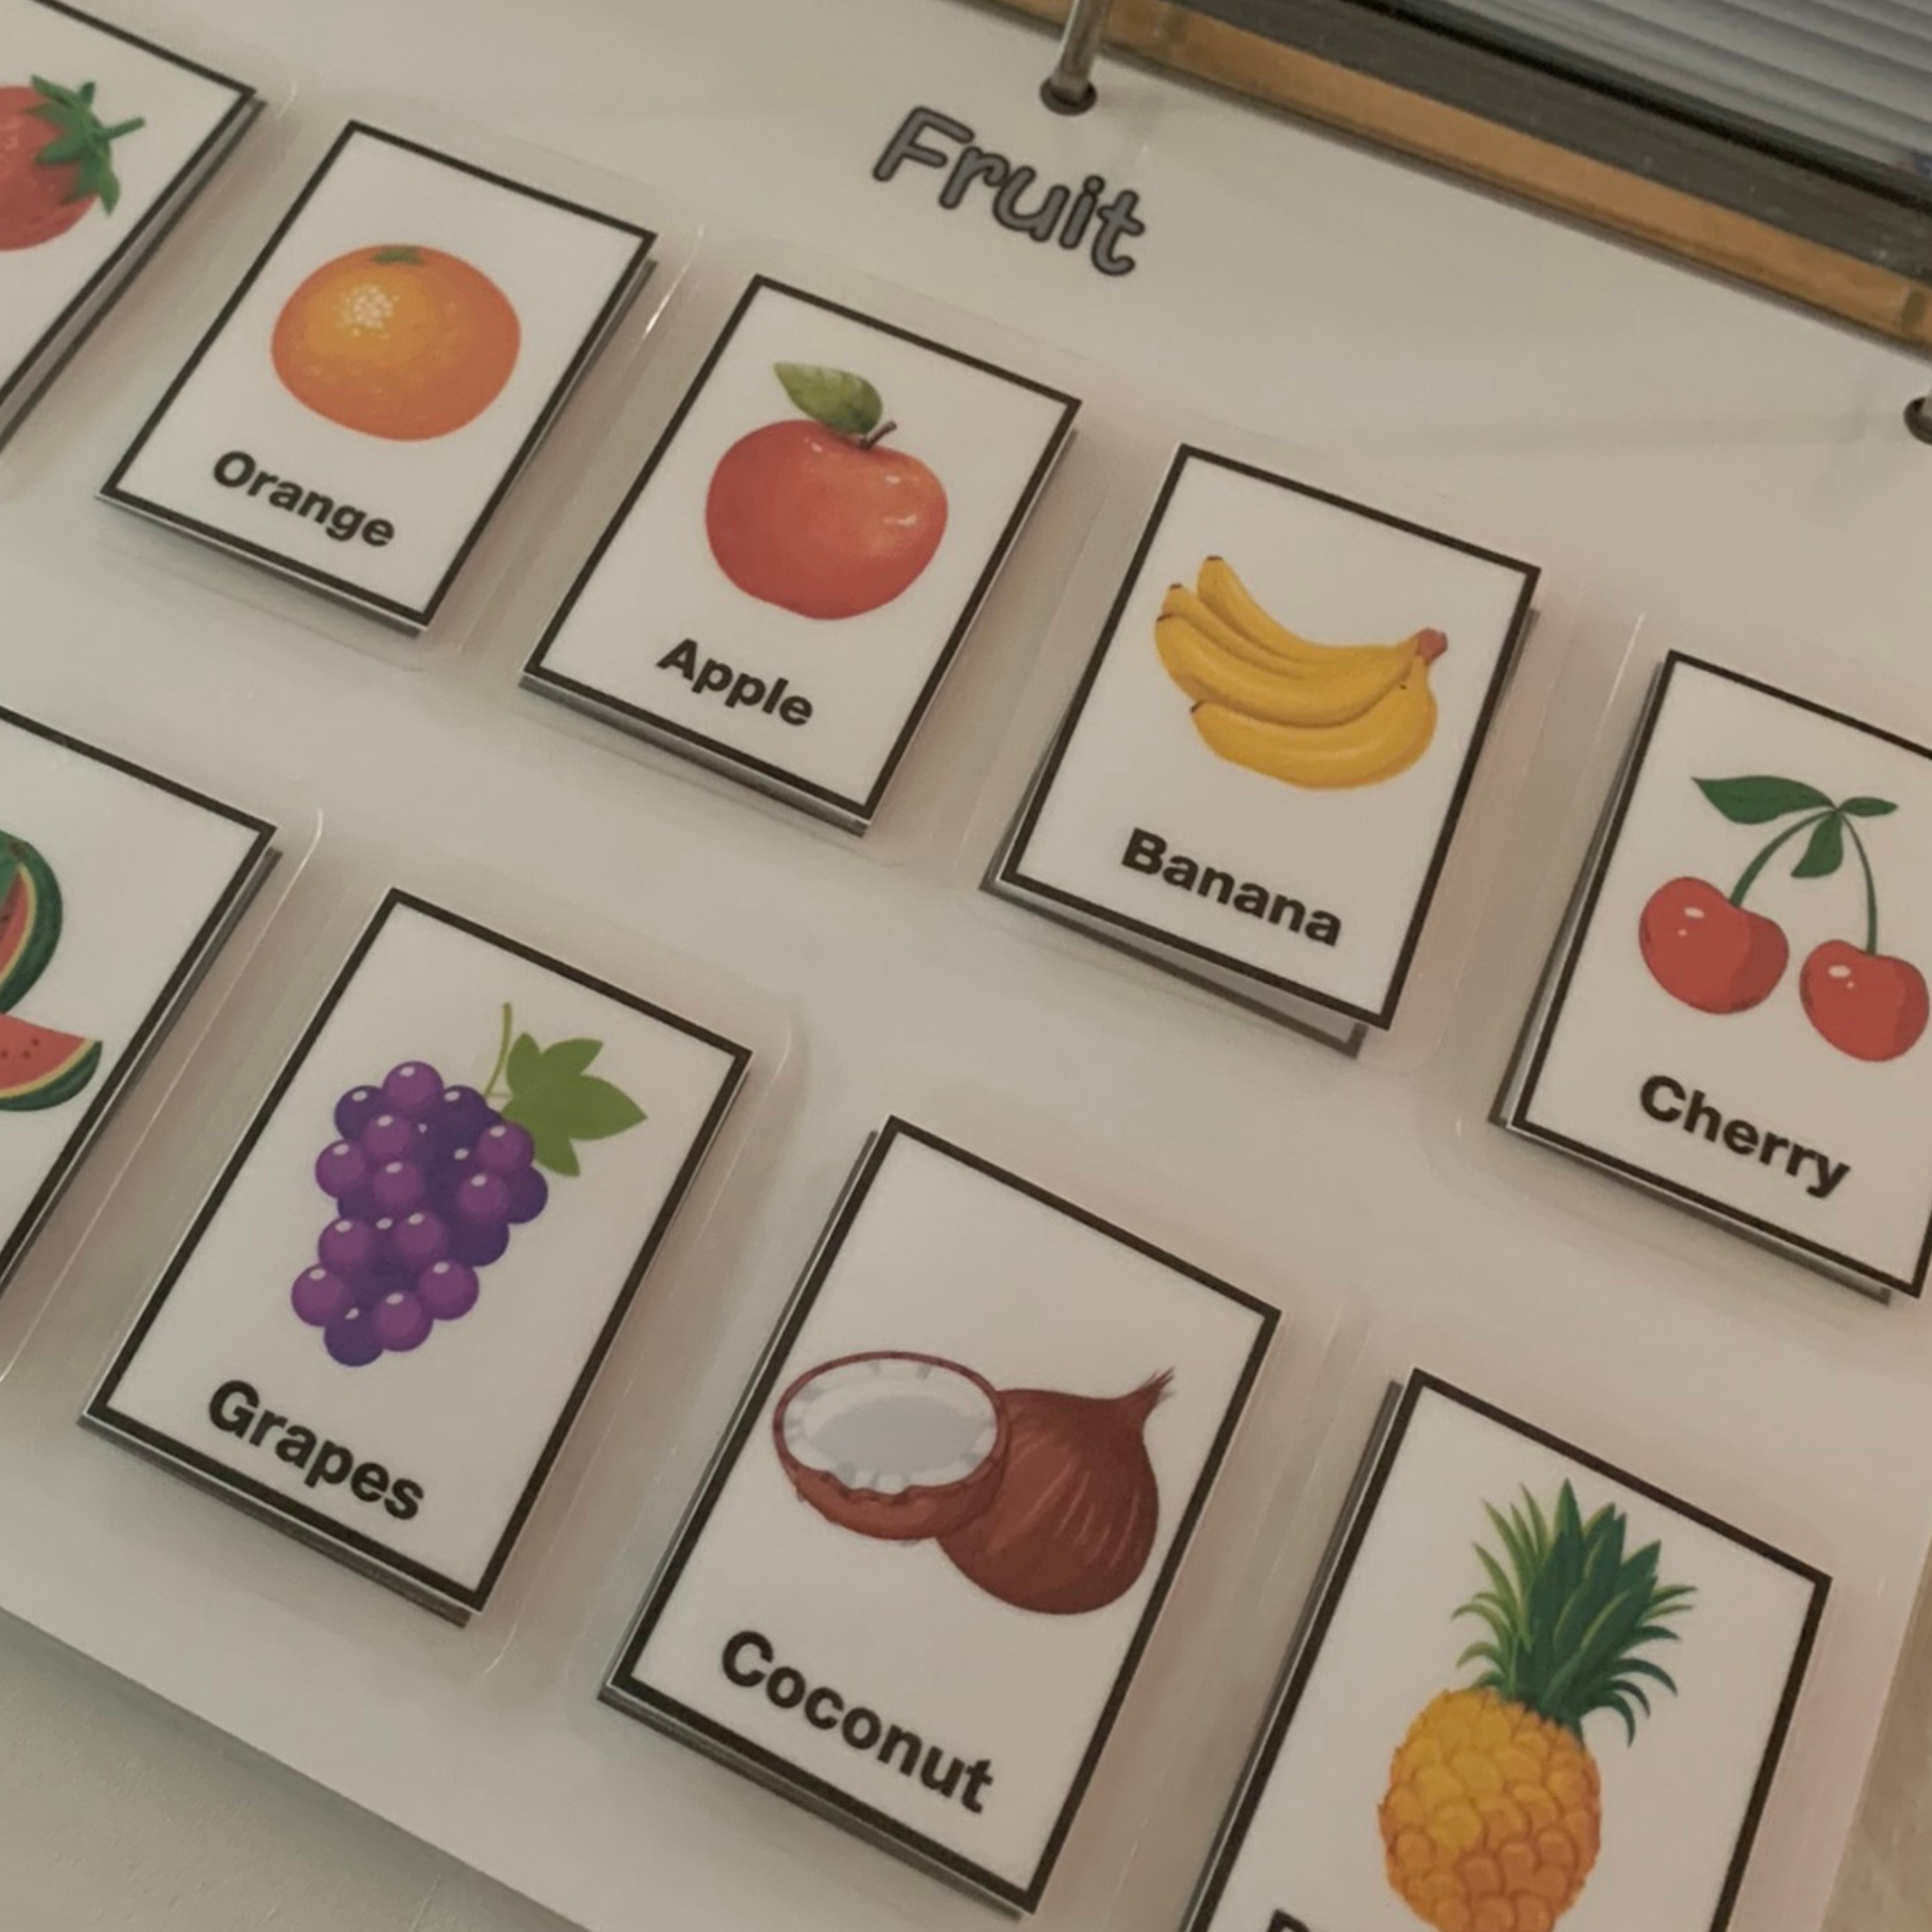 Explore IPLActivities learning binders|16 engaging activities, 140+ pictures including 8 from complementary task analysis activities to spark exploration and growth! This picture is of the fruit learning page that includes 10 pictures of fruit. 